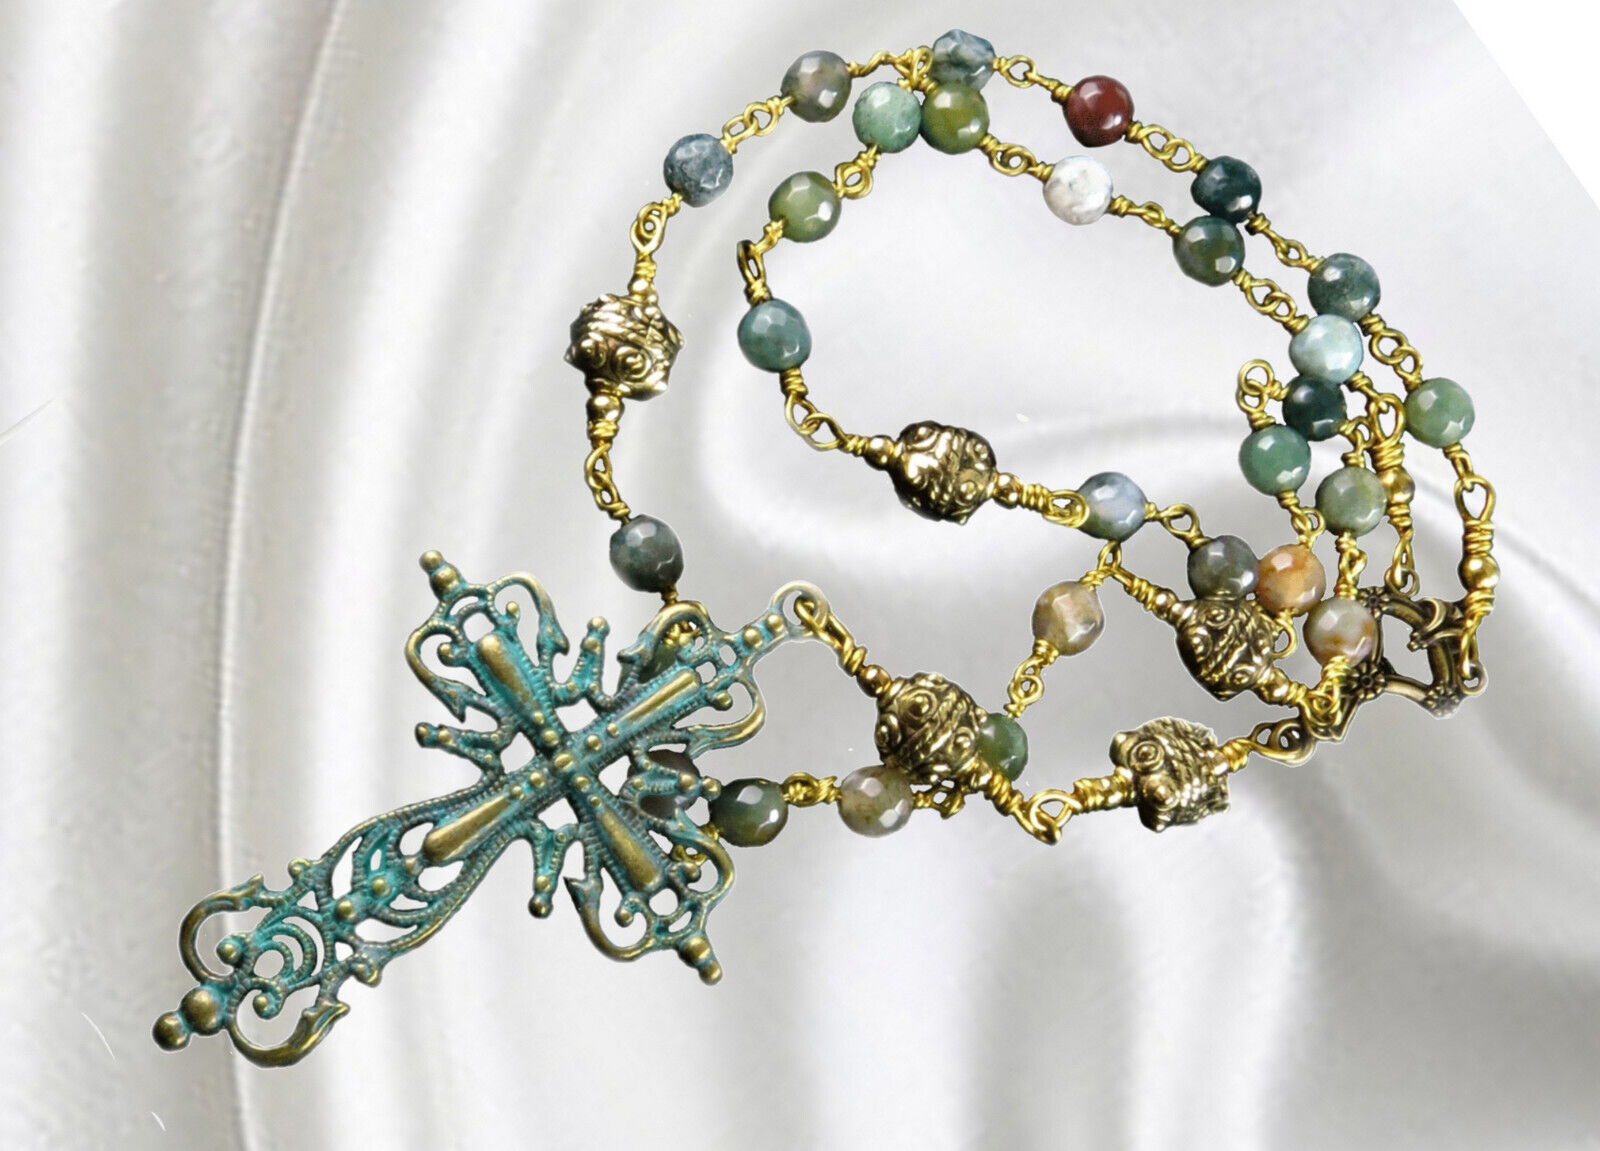 Anglican Unbreakable Rosary, Green Agate Beads, Gold Tone Beads, Verdigris Cross